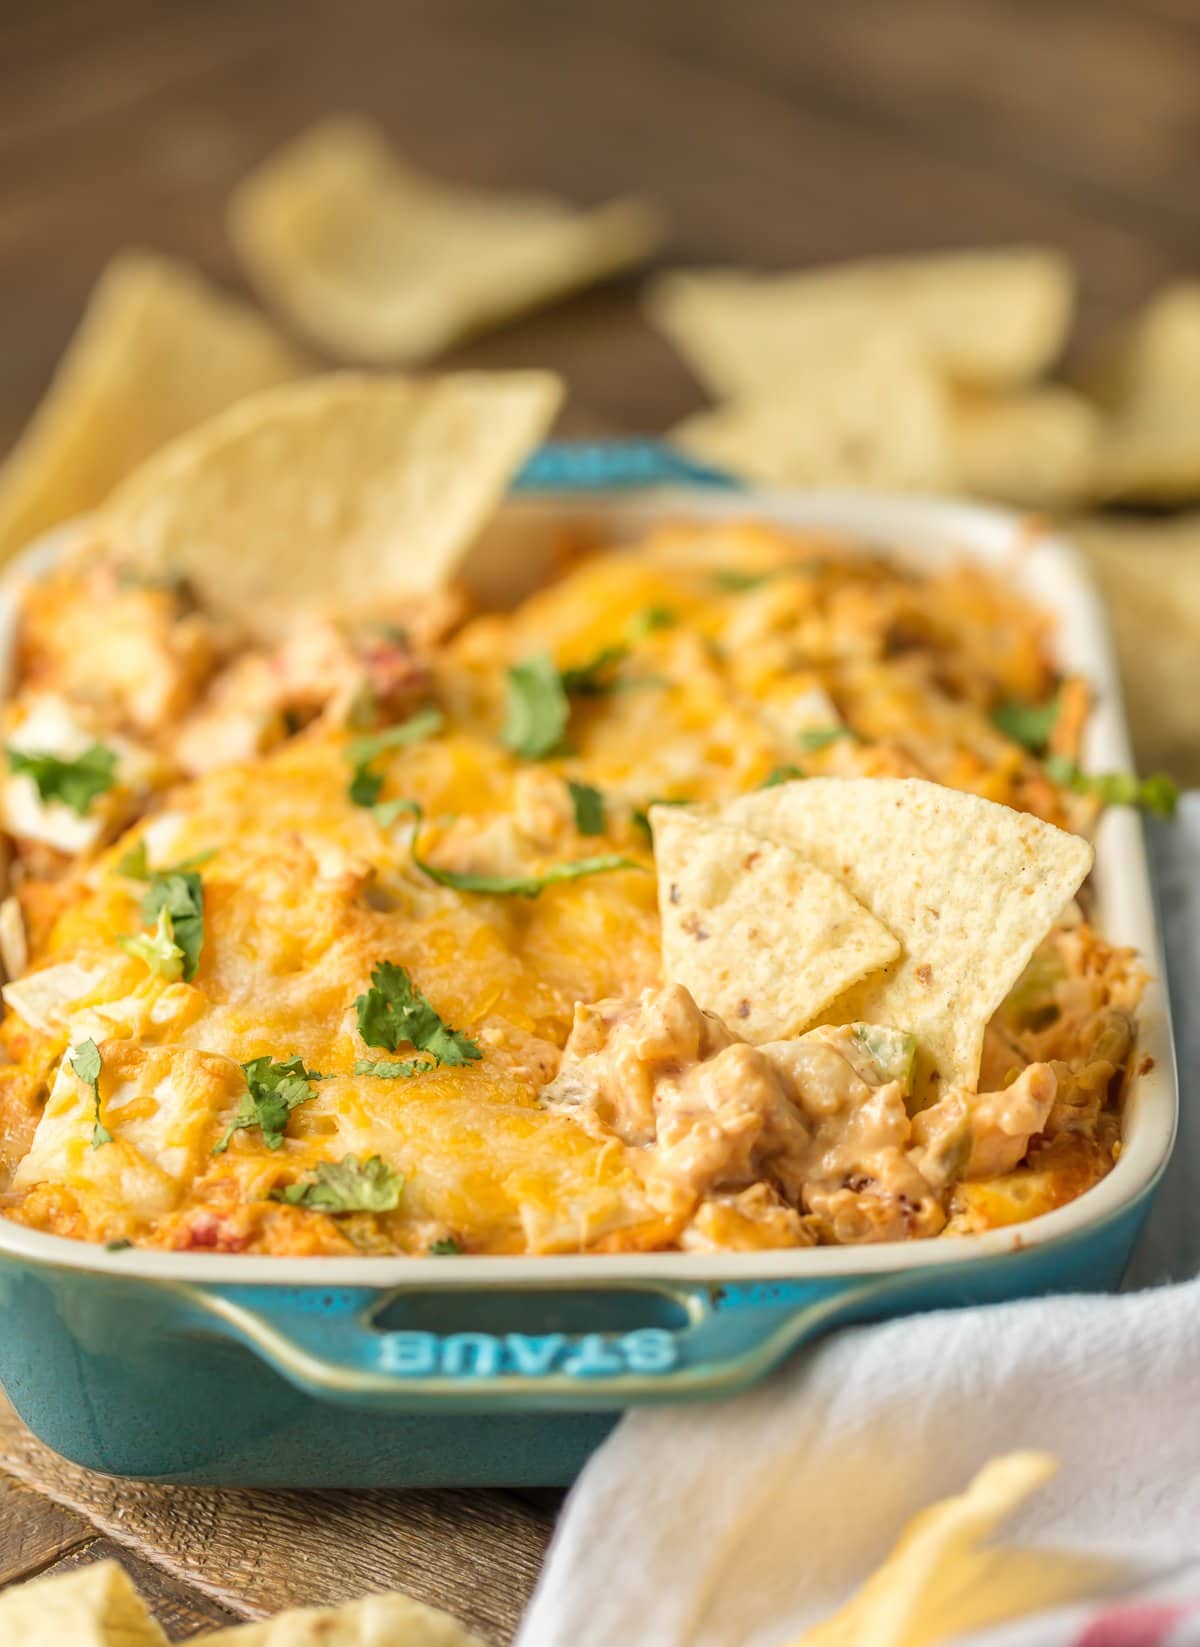 KING RANCH CHICKEN DIP is a fun twist on a classic family favorite casserole. The flavors including chicken, rotel, cheese, and tortillas lend themselves easily to a delicious dip, just perfect for the Super Bowl!